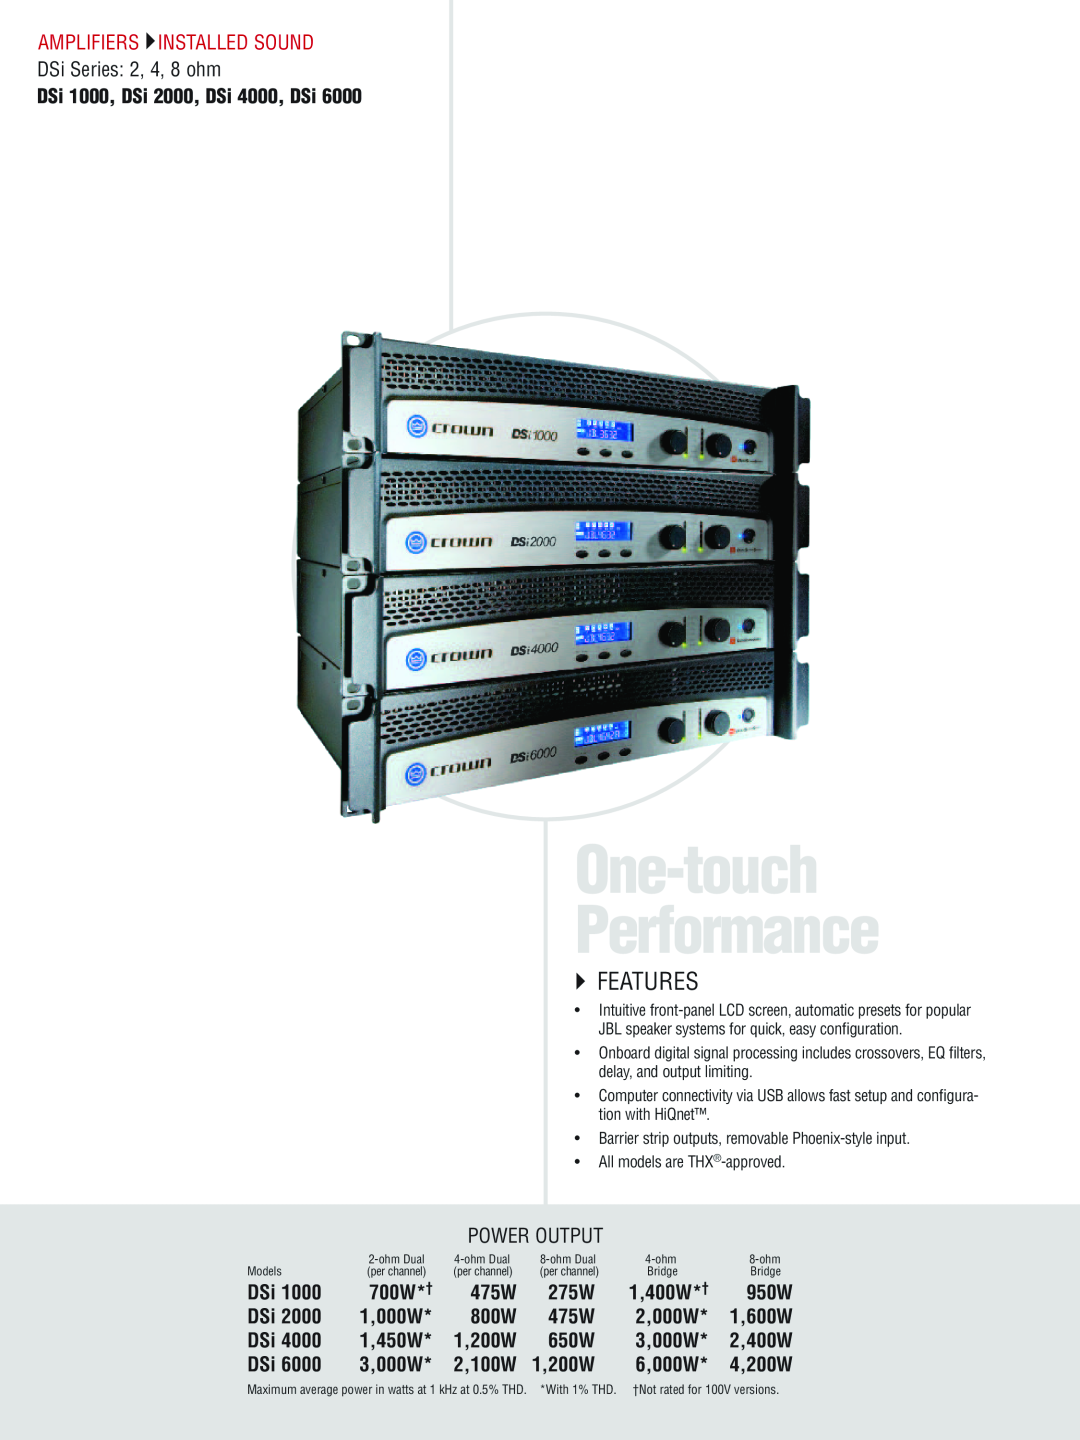 Crown CTS 3000, CTS 2000, CTS 1200, CTS 600 manual One-touch Performance, `` Features, Amplifiers Installed Sound 